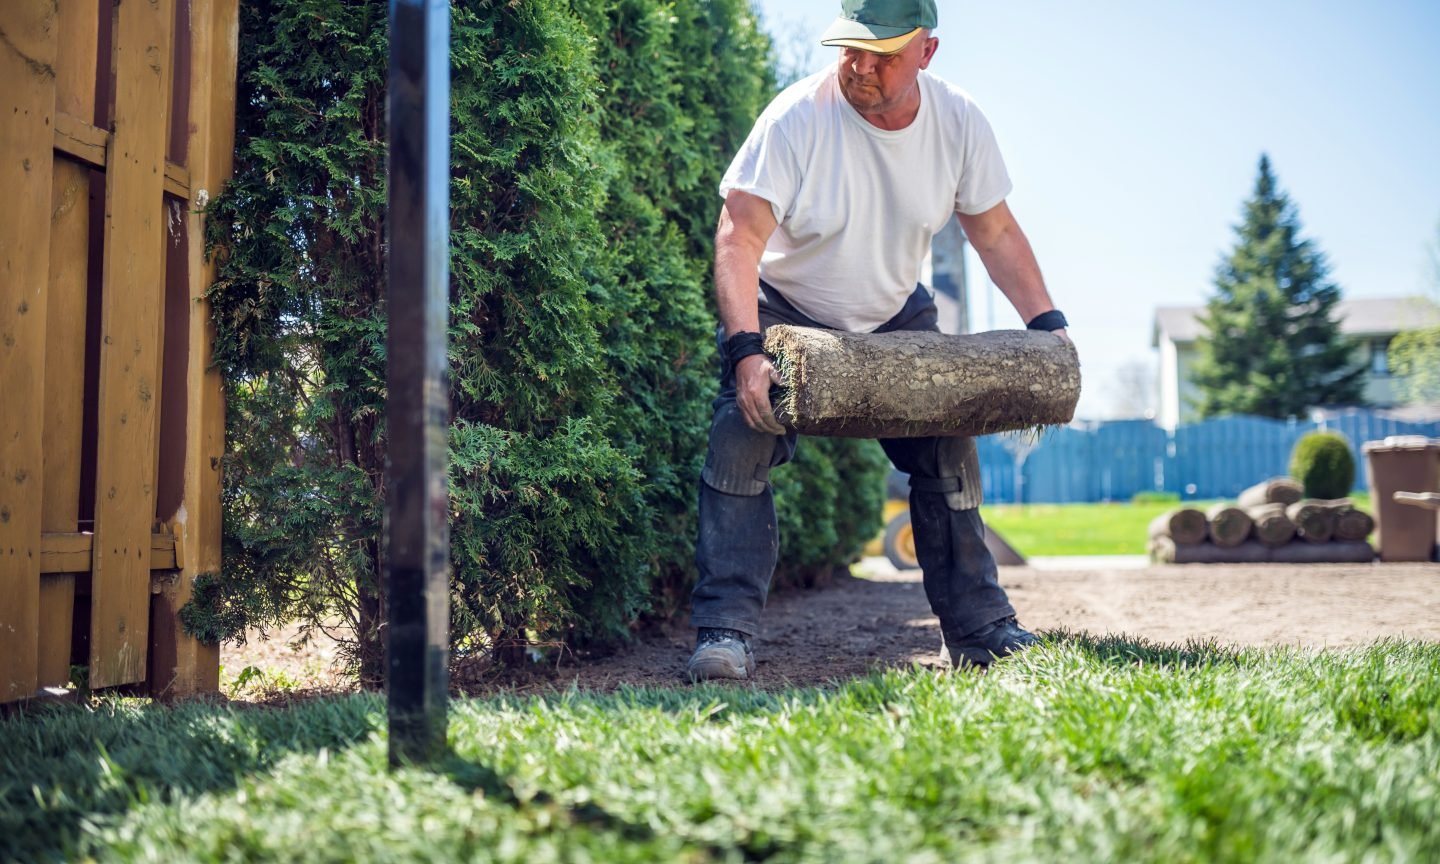 A Landscaping Or Lawn Care Business, How Much Does Landscaping Pay An Hour